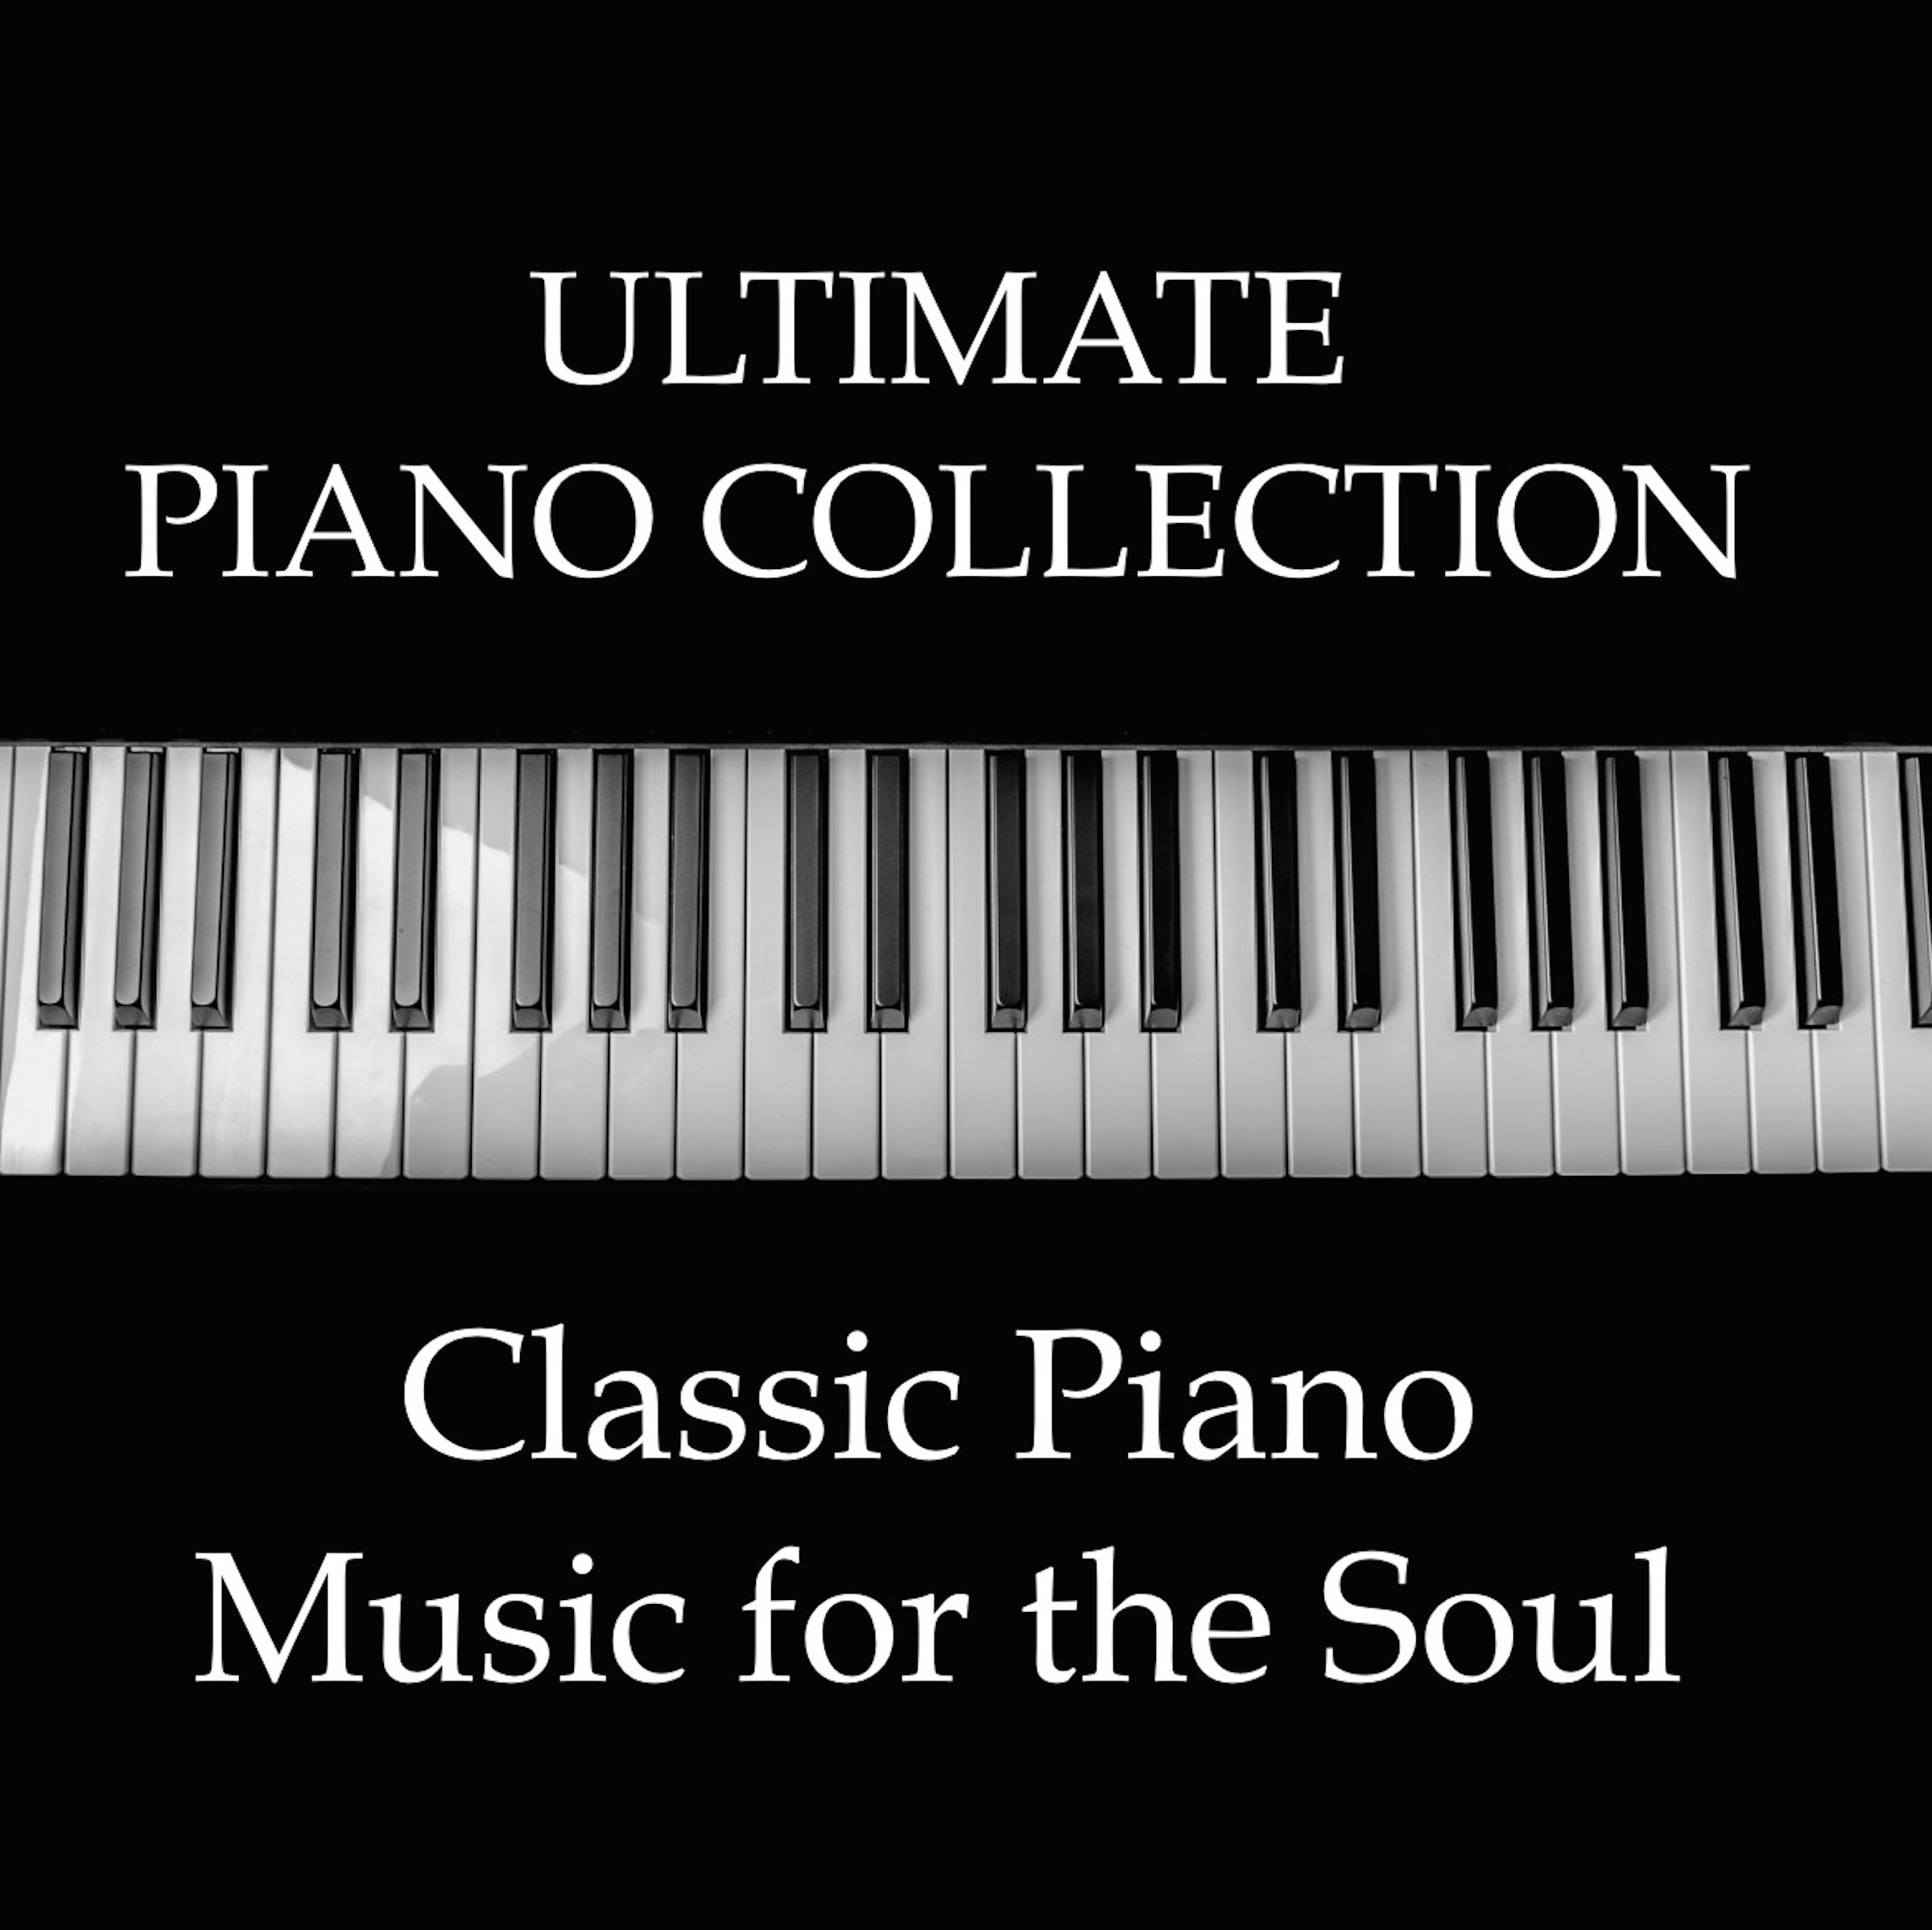 The Ultimate Piano Collection - Peaceful, Classic Piano Melodies for the Mind, Body and Soul